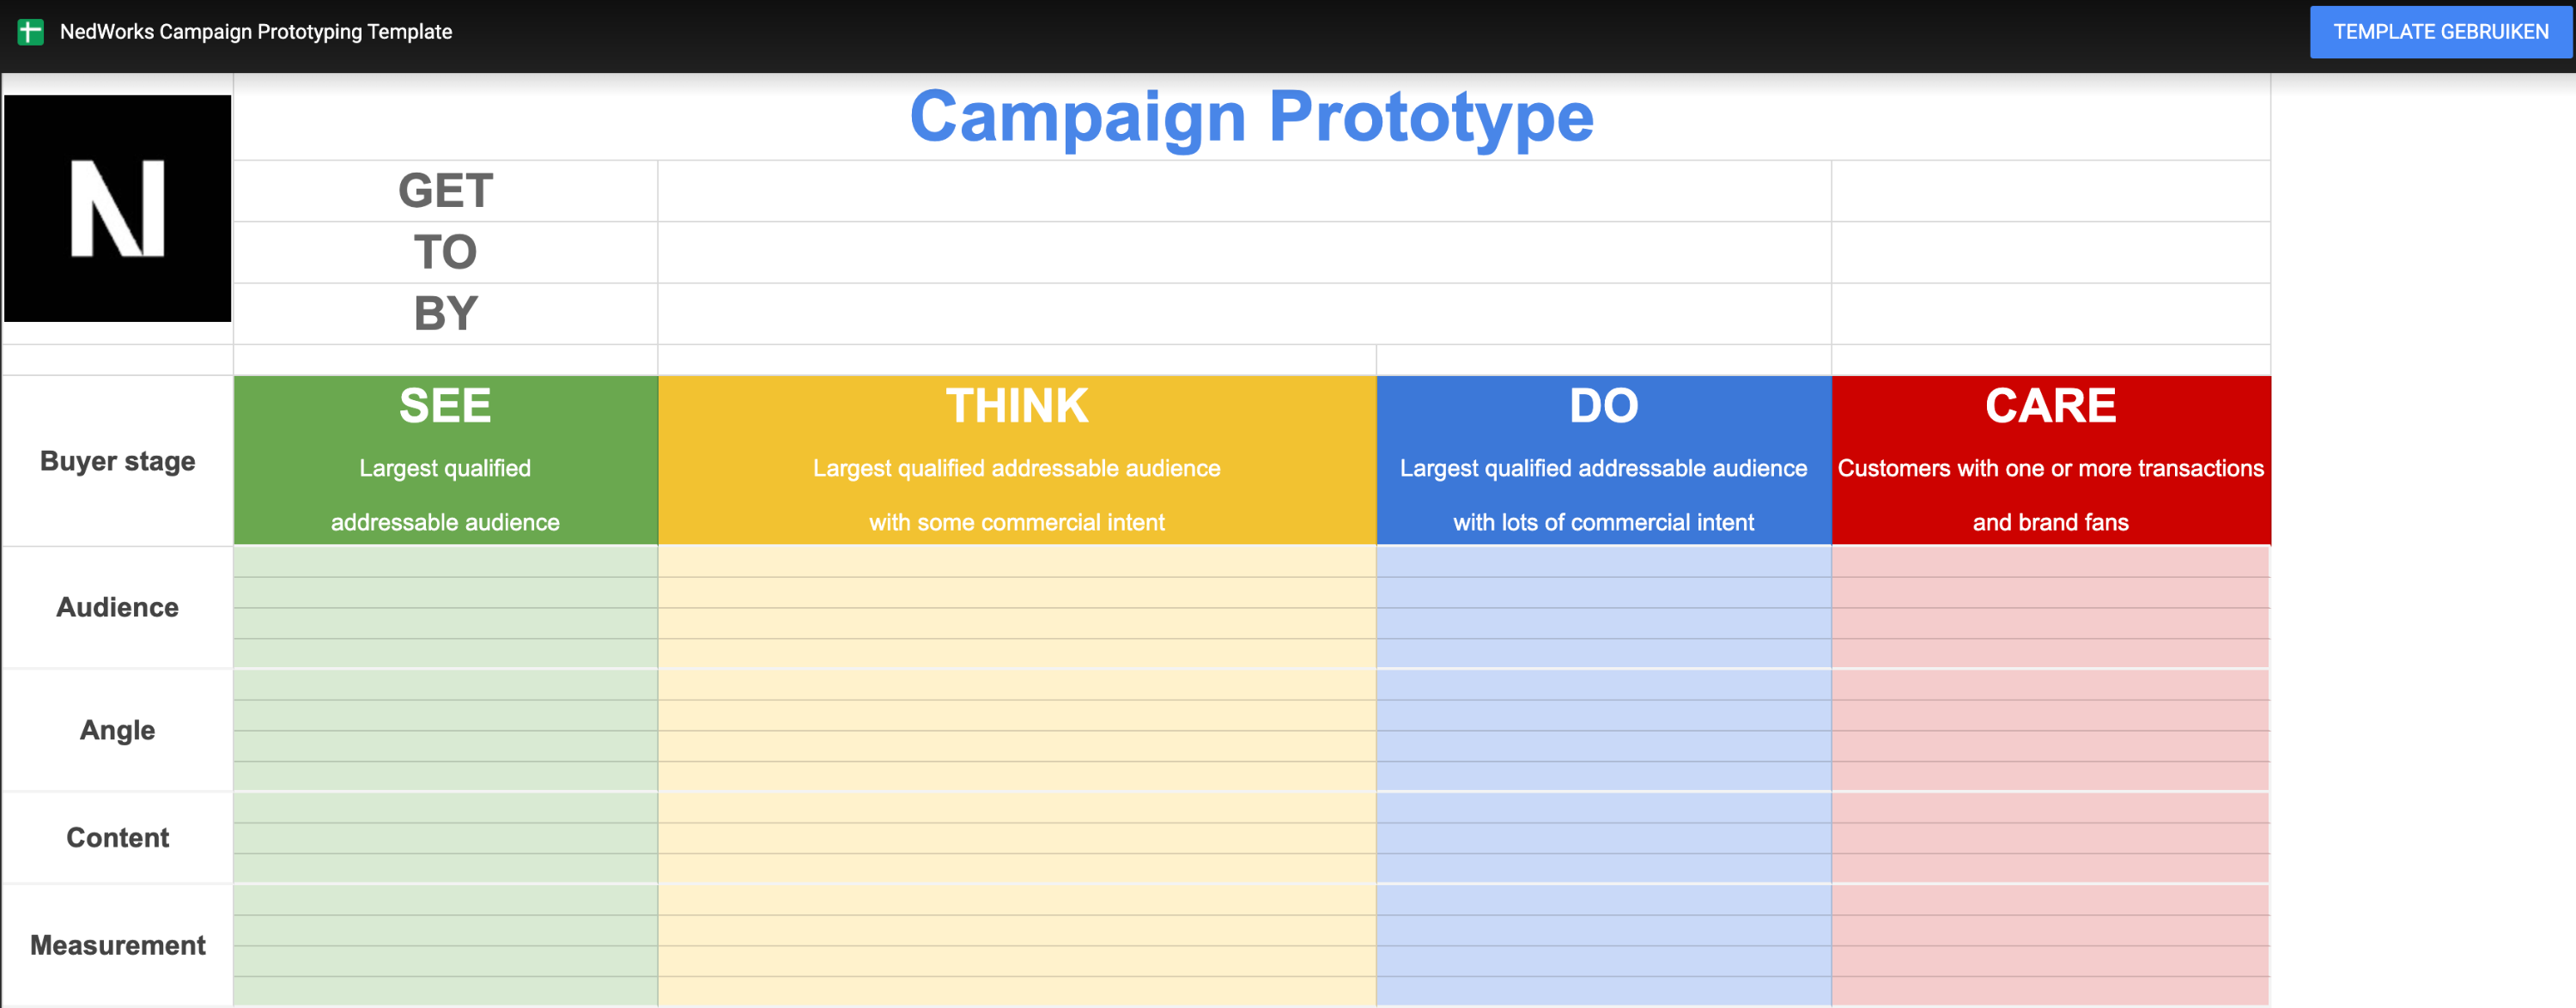 GET TO BY campaign prototyping template by NedWorks